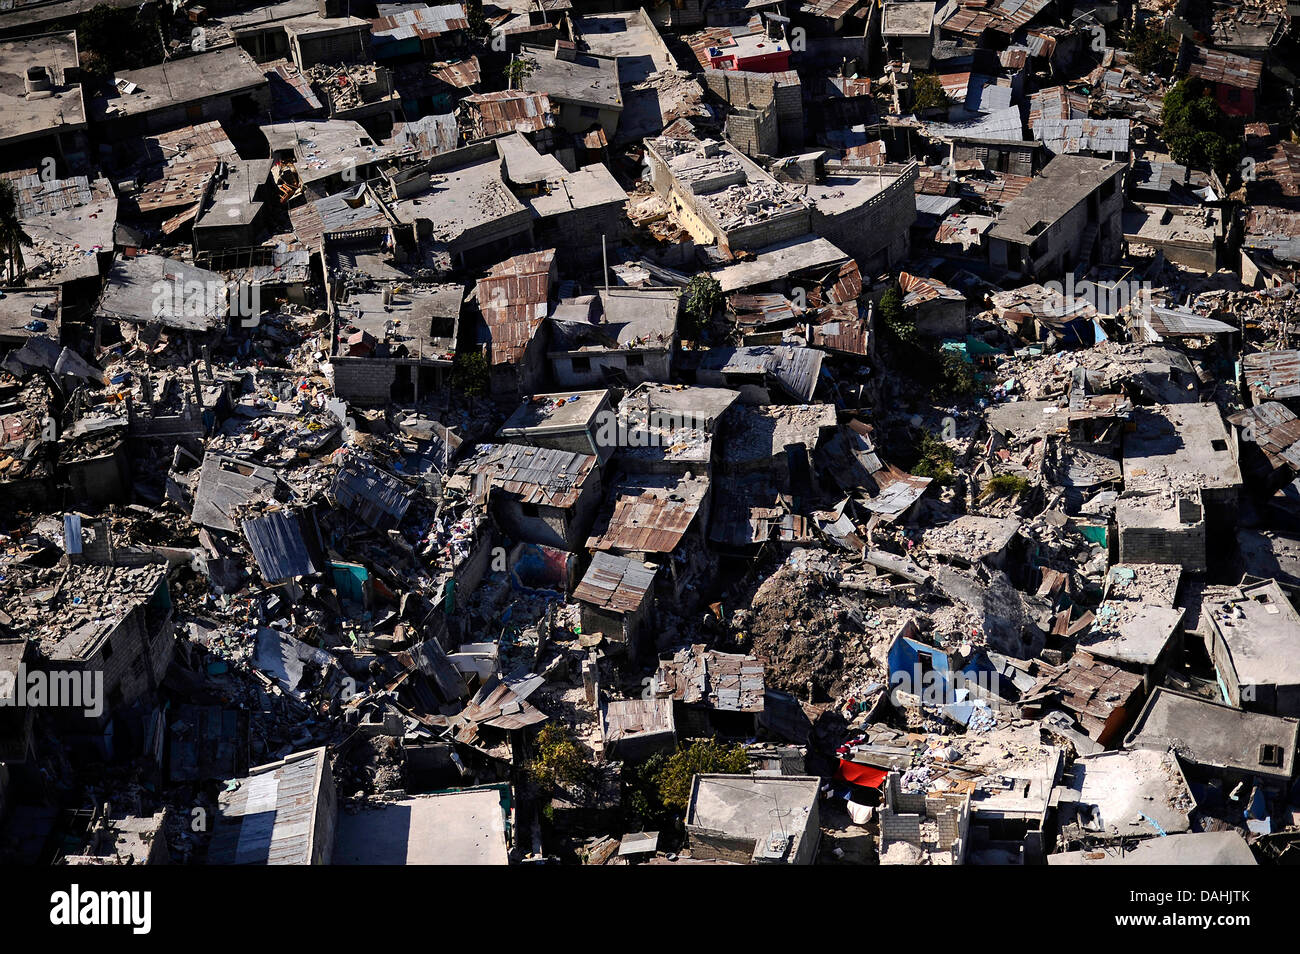 Aerial view the ruins and destruction of a crowded slum in the aftermath of a 7.0 magnitude earthquake that killed 220,000 people January 28, 2010 in Port-au-Prince, Haiti. Stock Photo